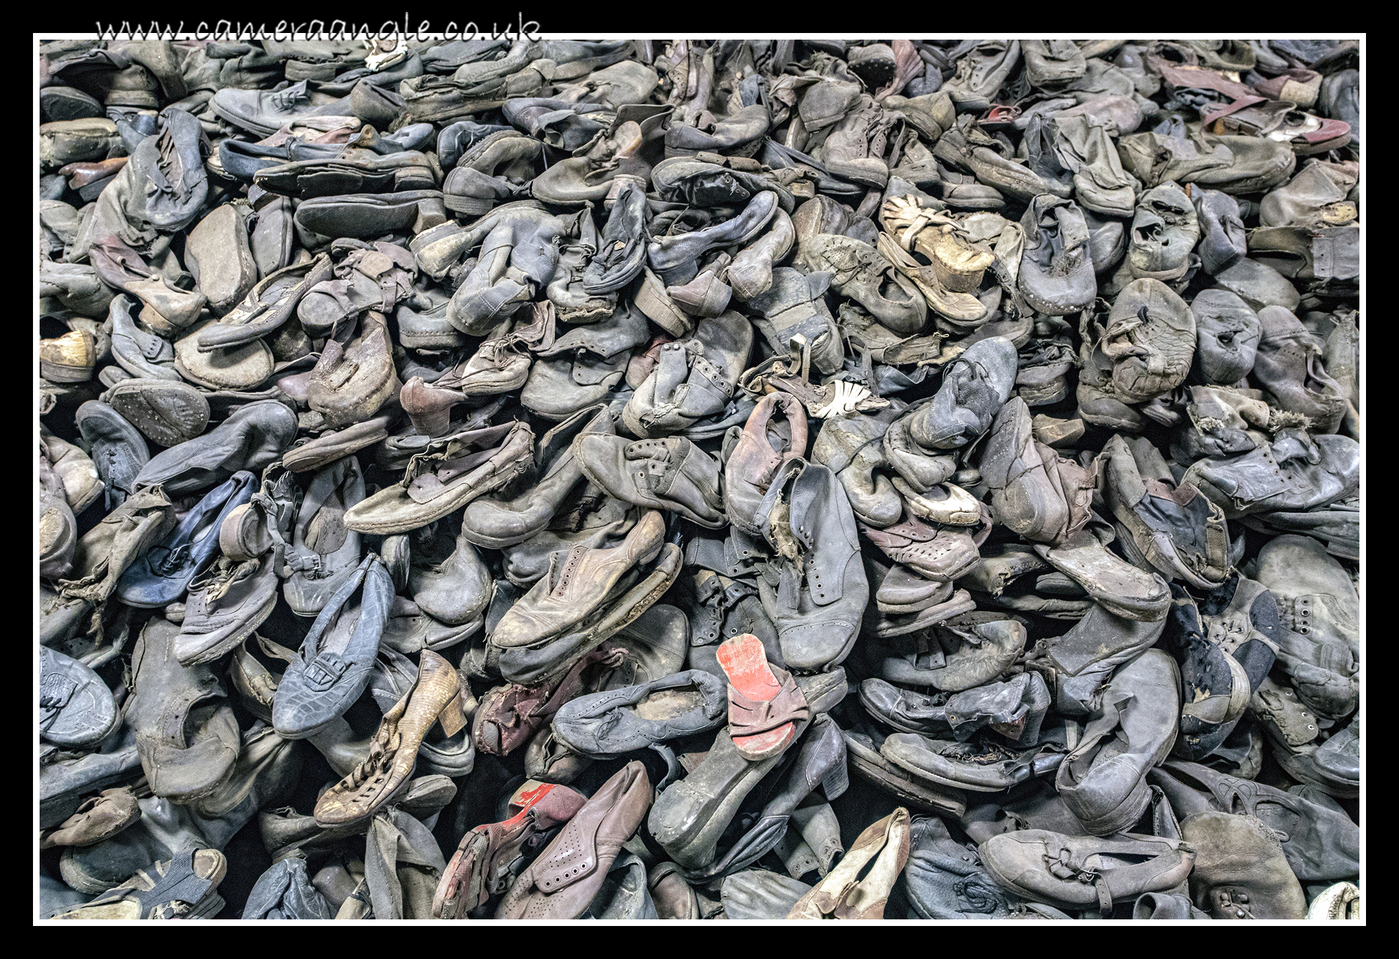 Shoes
Shoes taken from Auschwitz victims
Keywords: Auschwitz Shoes 2019 Krakow